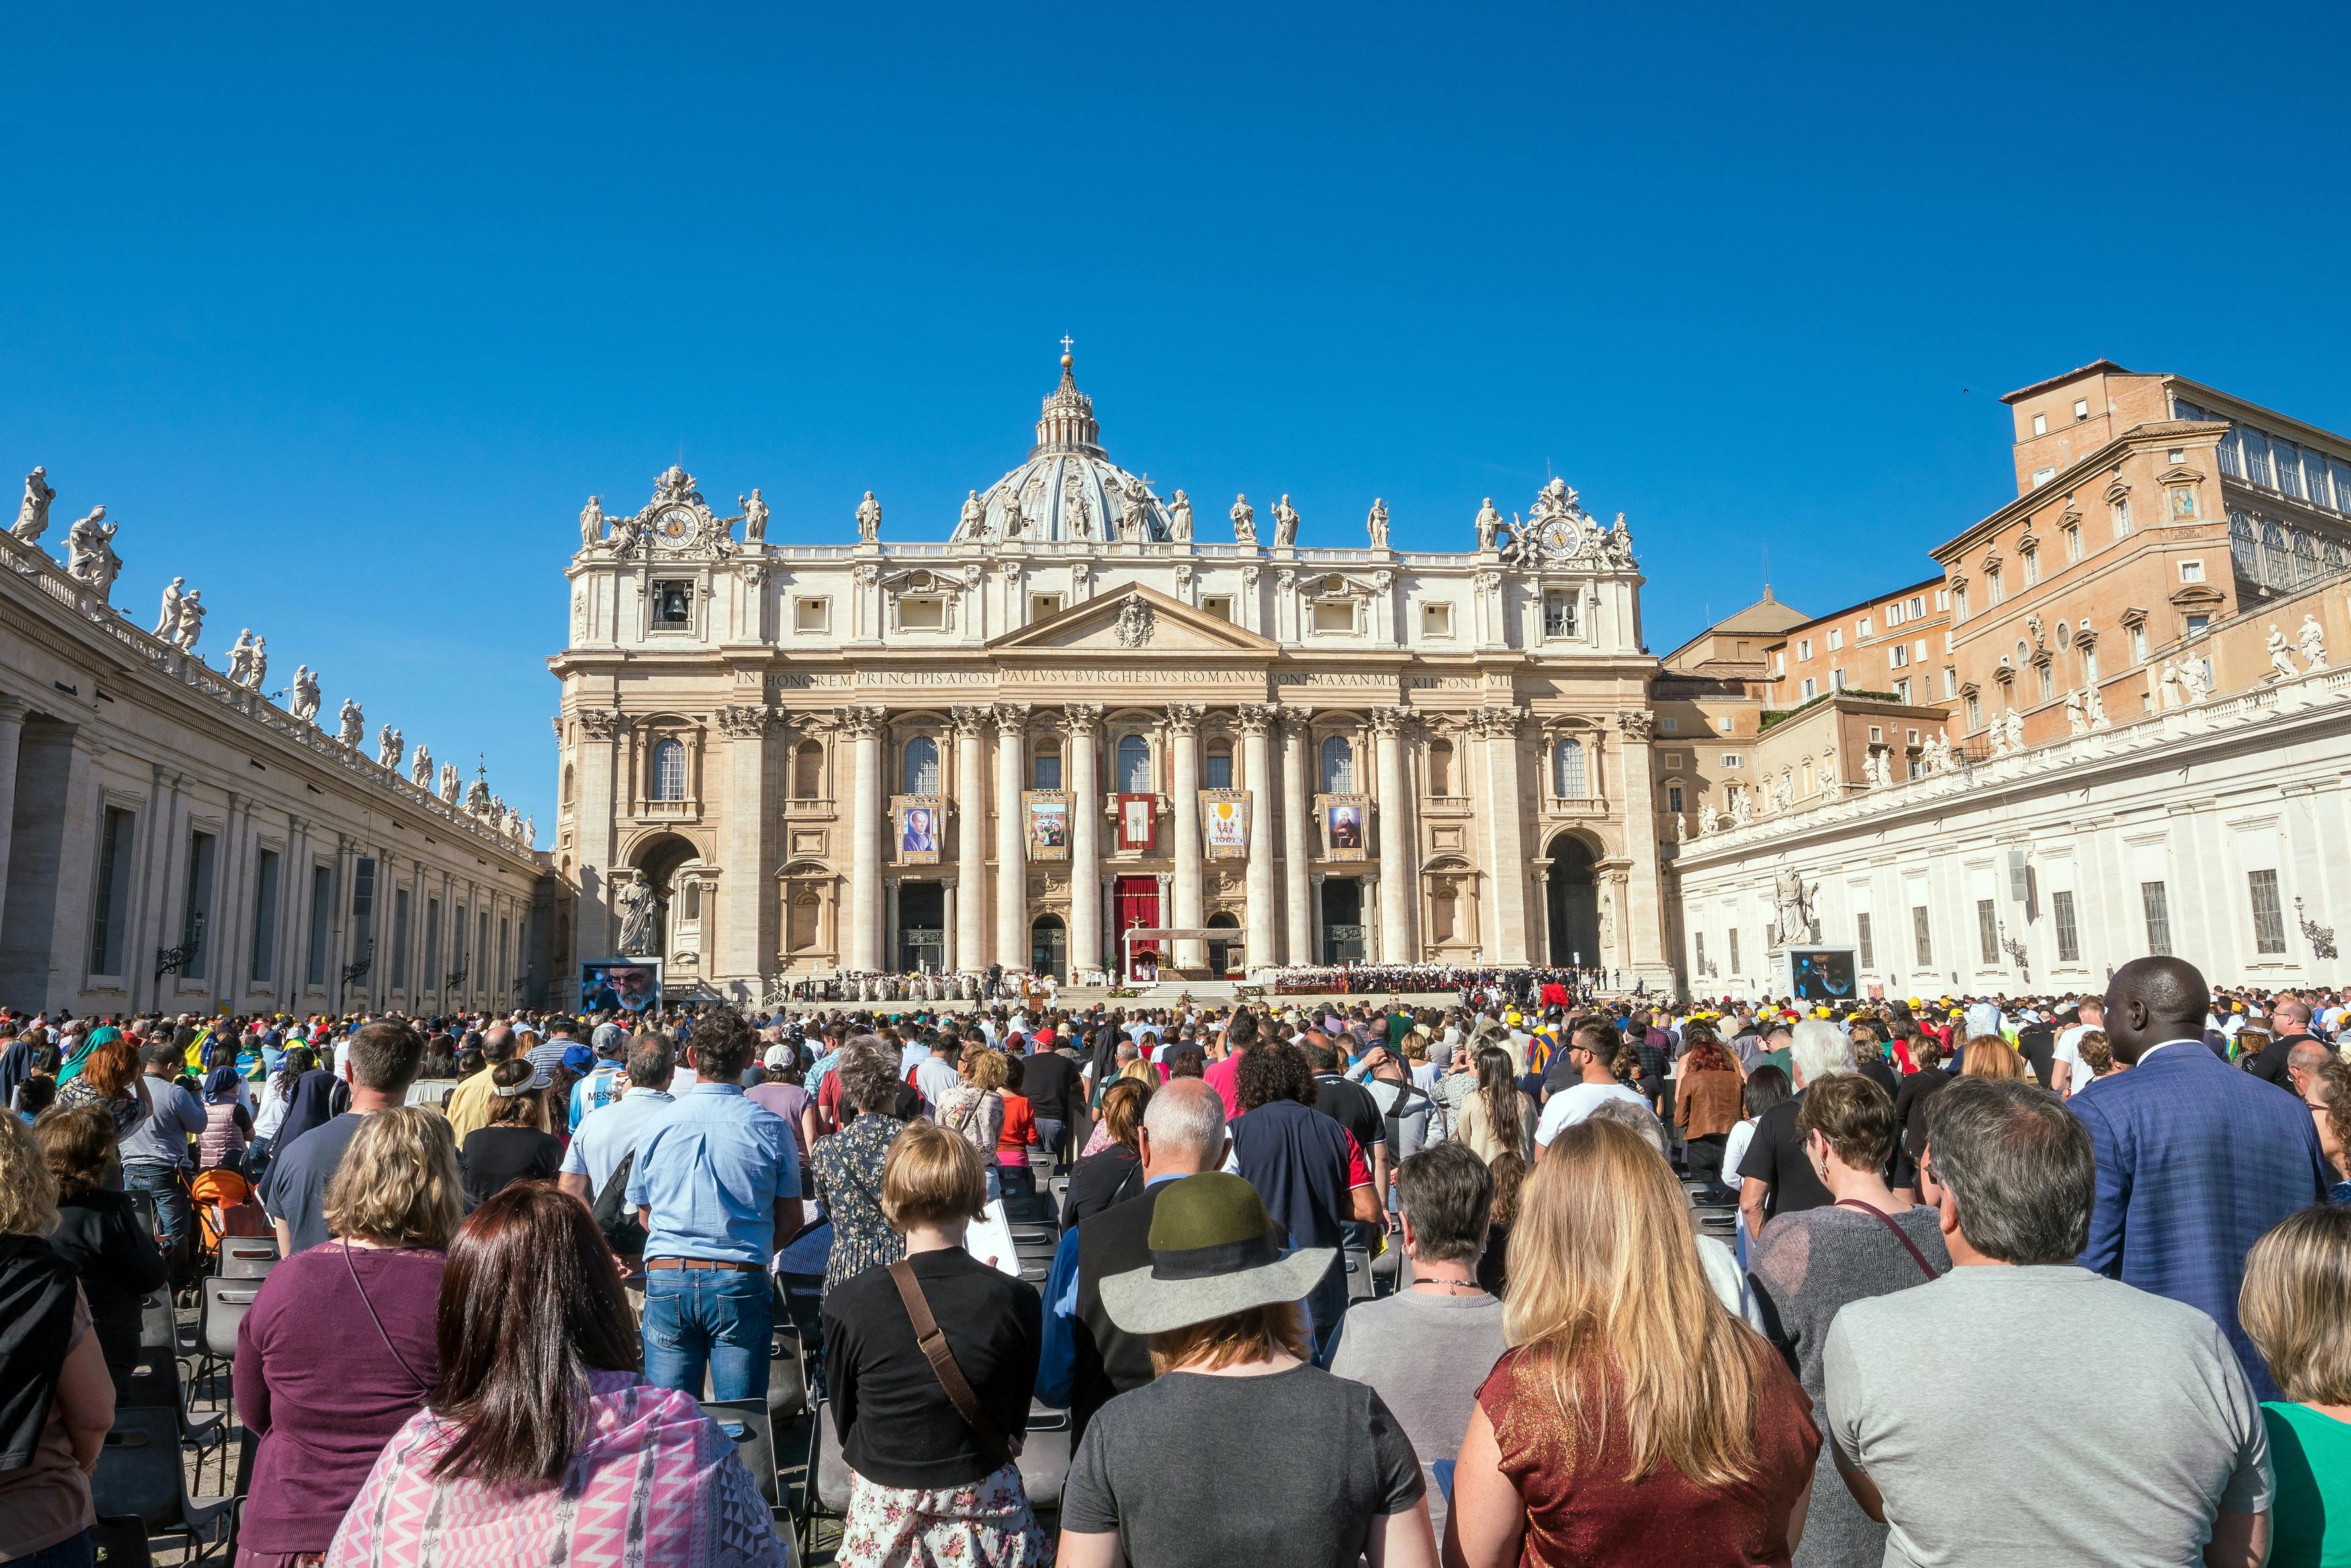 Pope Francis audience and Rome coach tour with a local guide